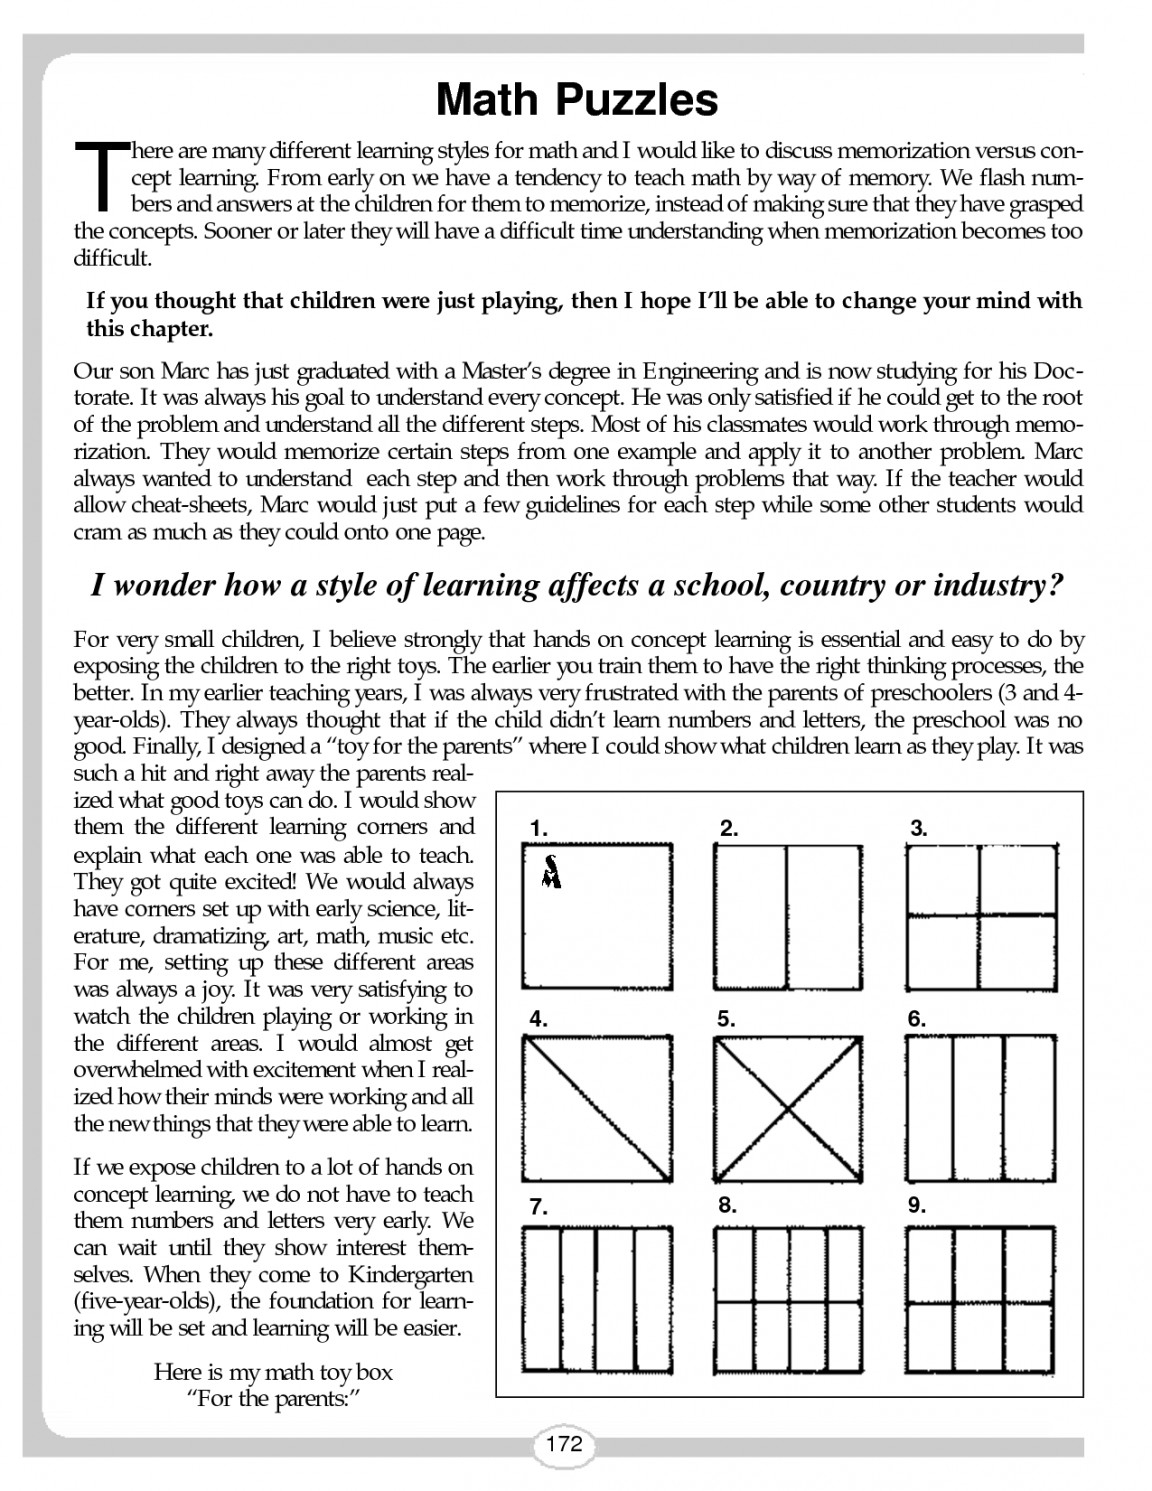 Free Printable Logic Puzzles For High School Students | Free Printables - Printable Math Puzzles For High School